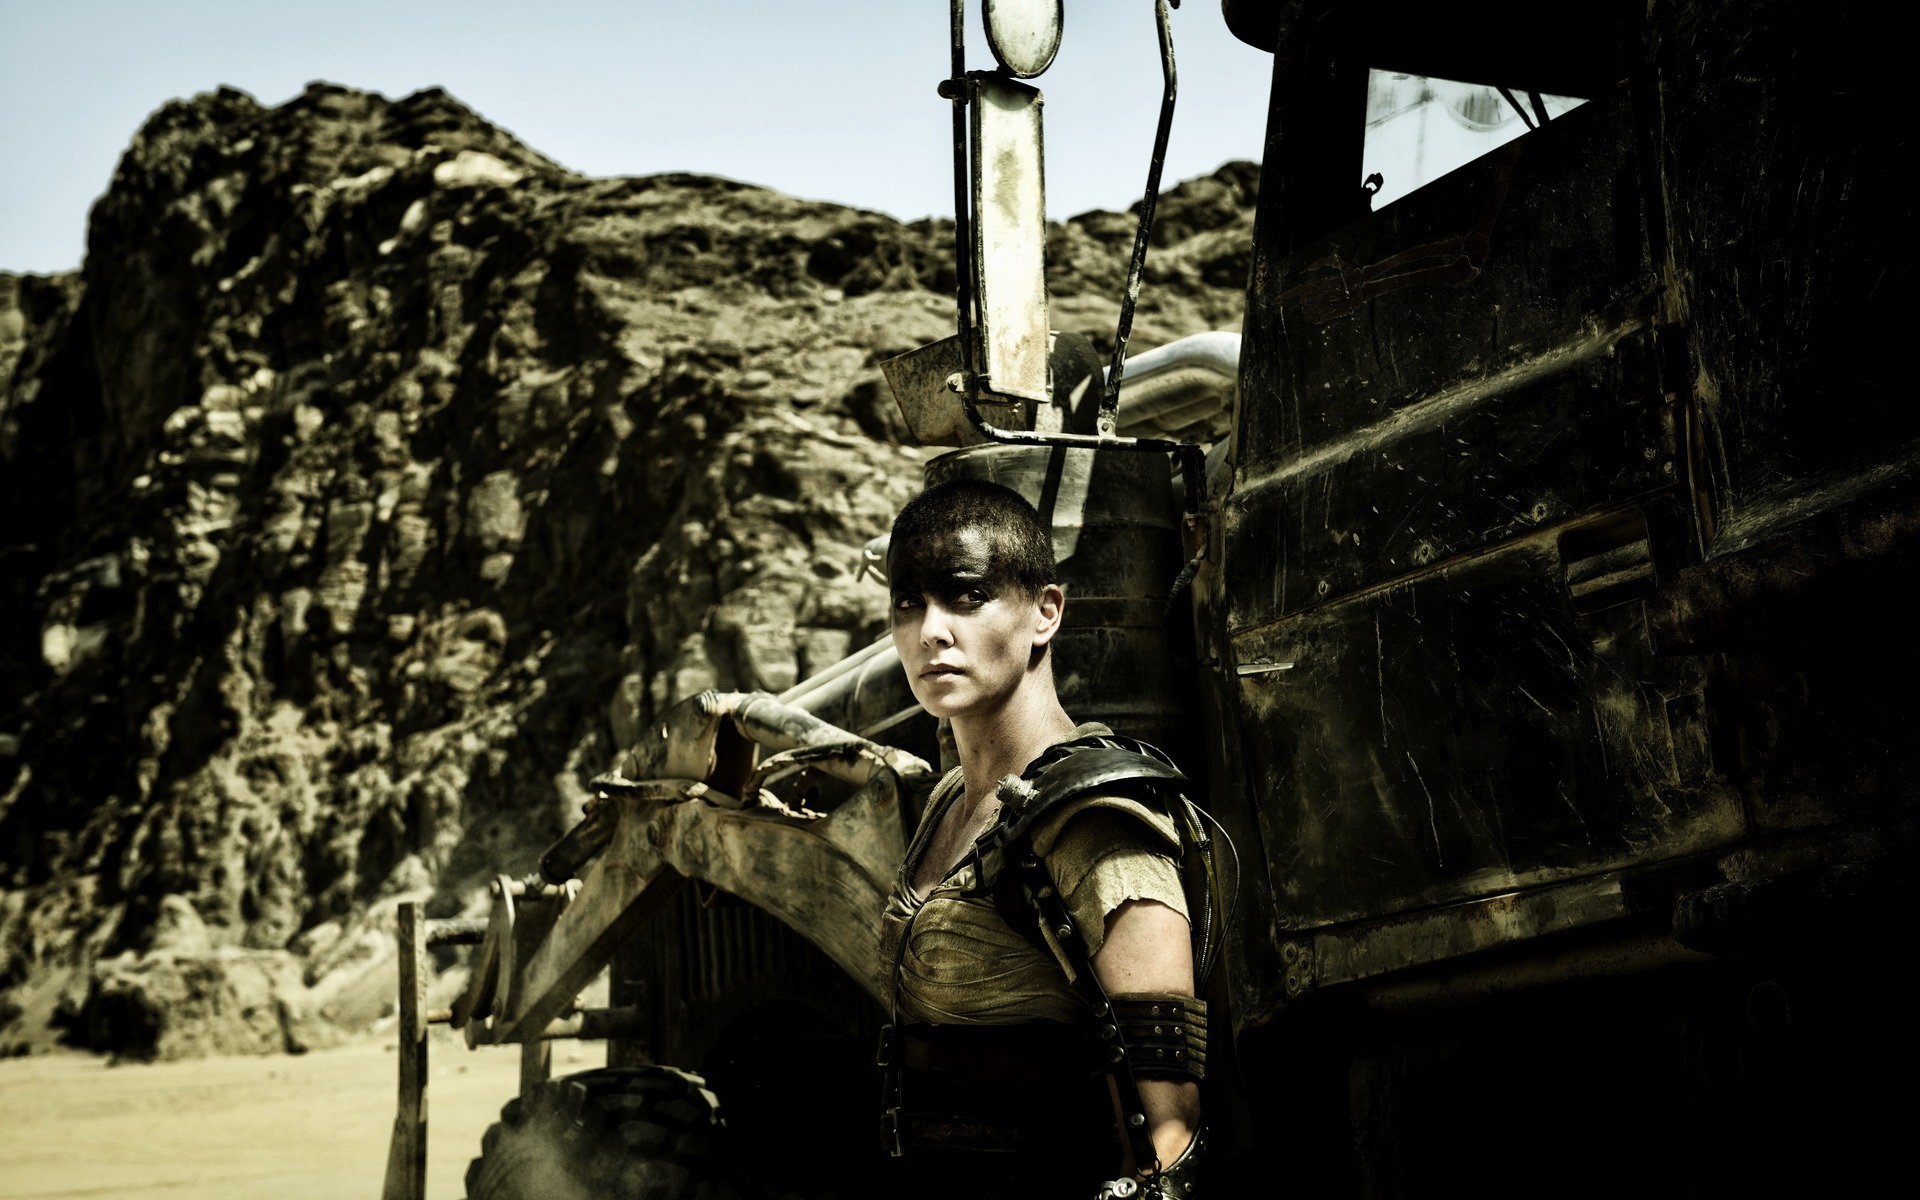 Mad Max: Fury Road, HD movie wallpapers #49 - 1920x1200